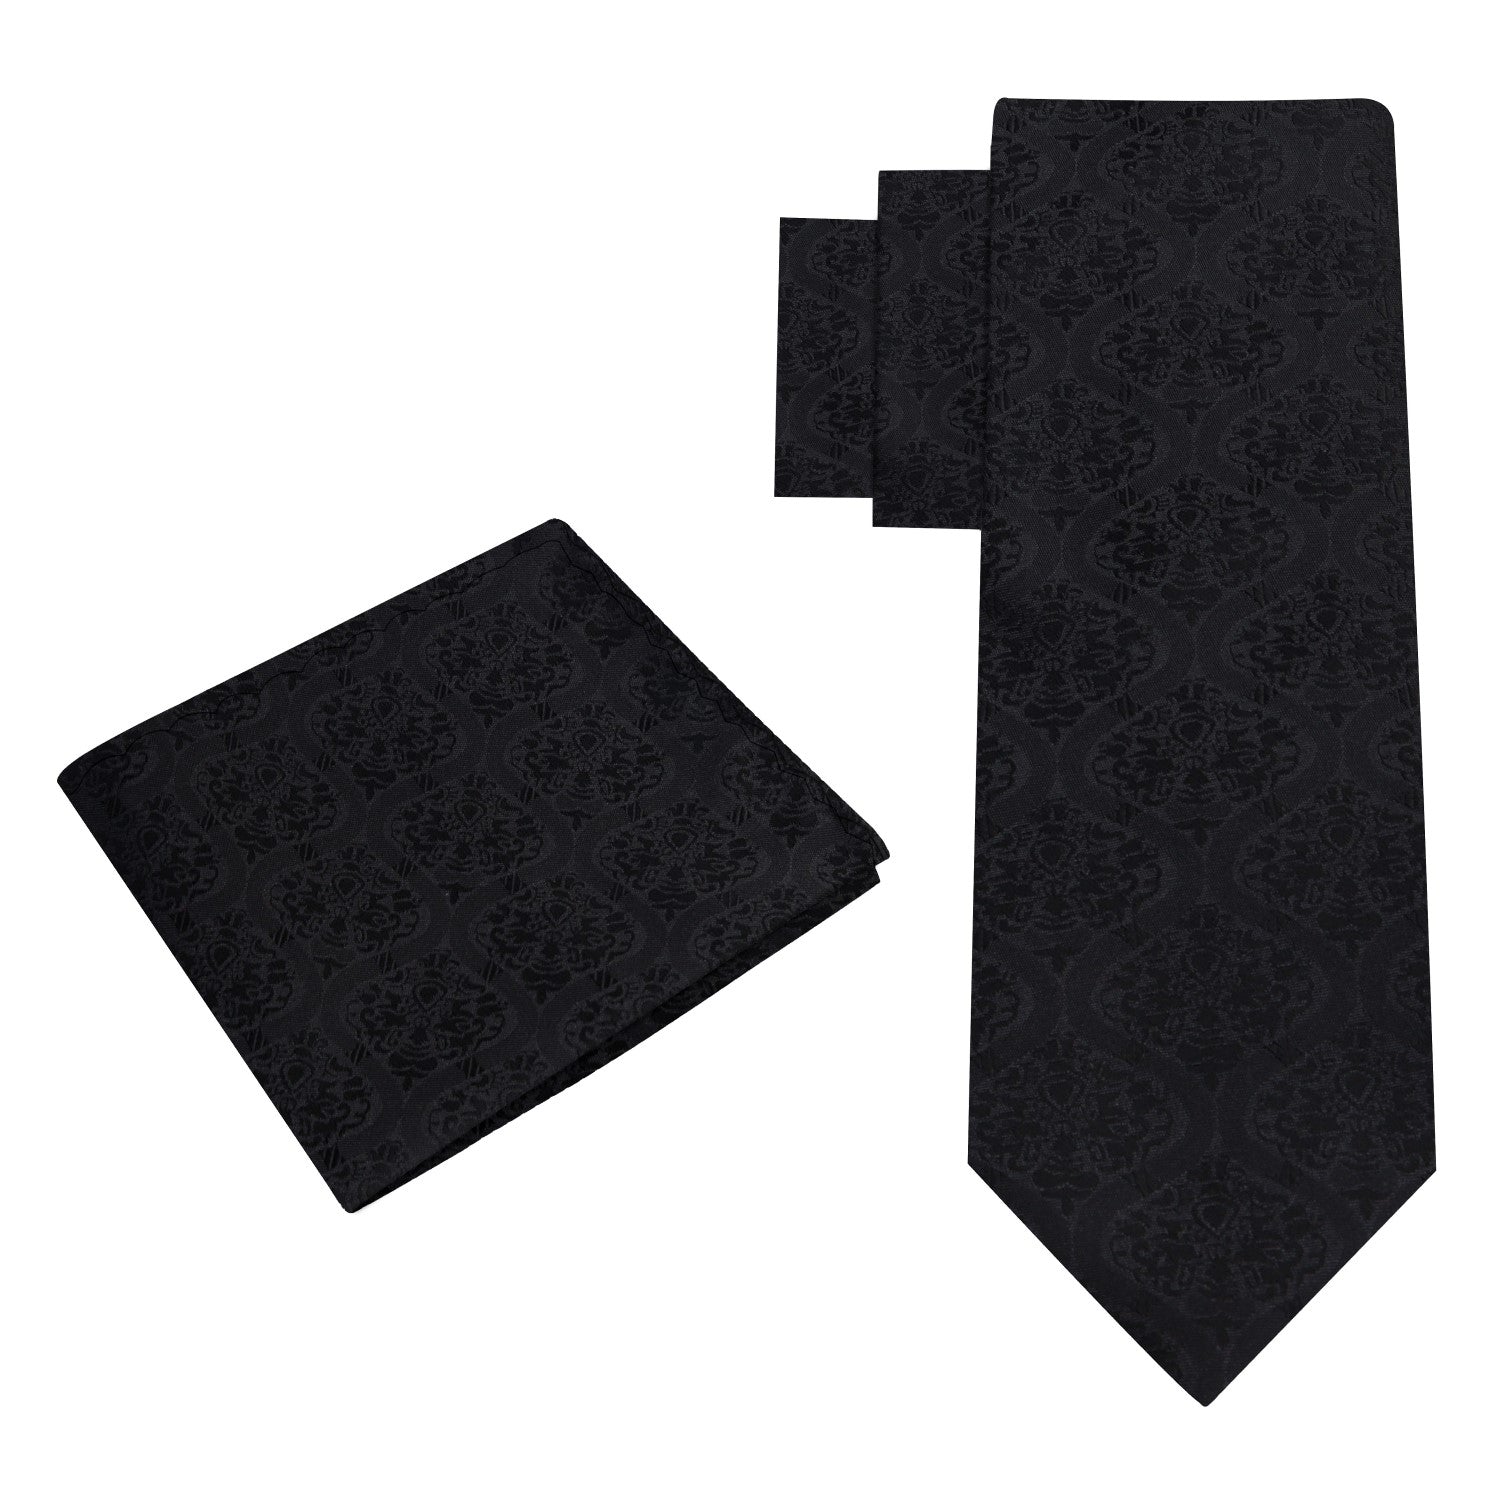 Alt View: Black, black abstract tie and pocket square